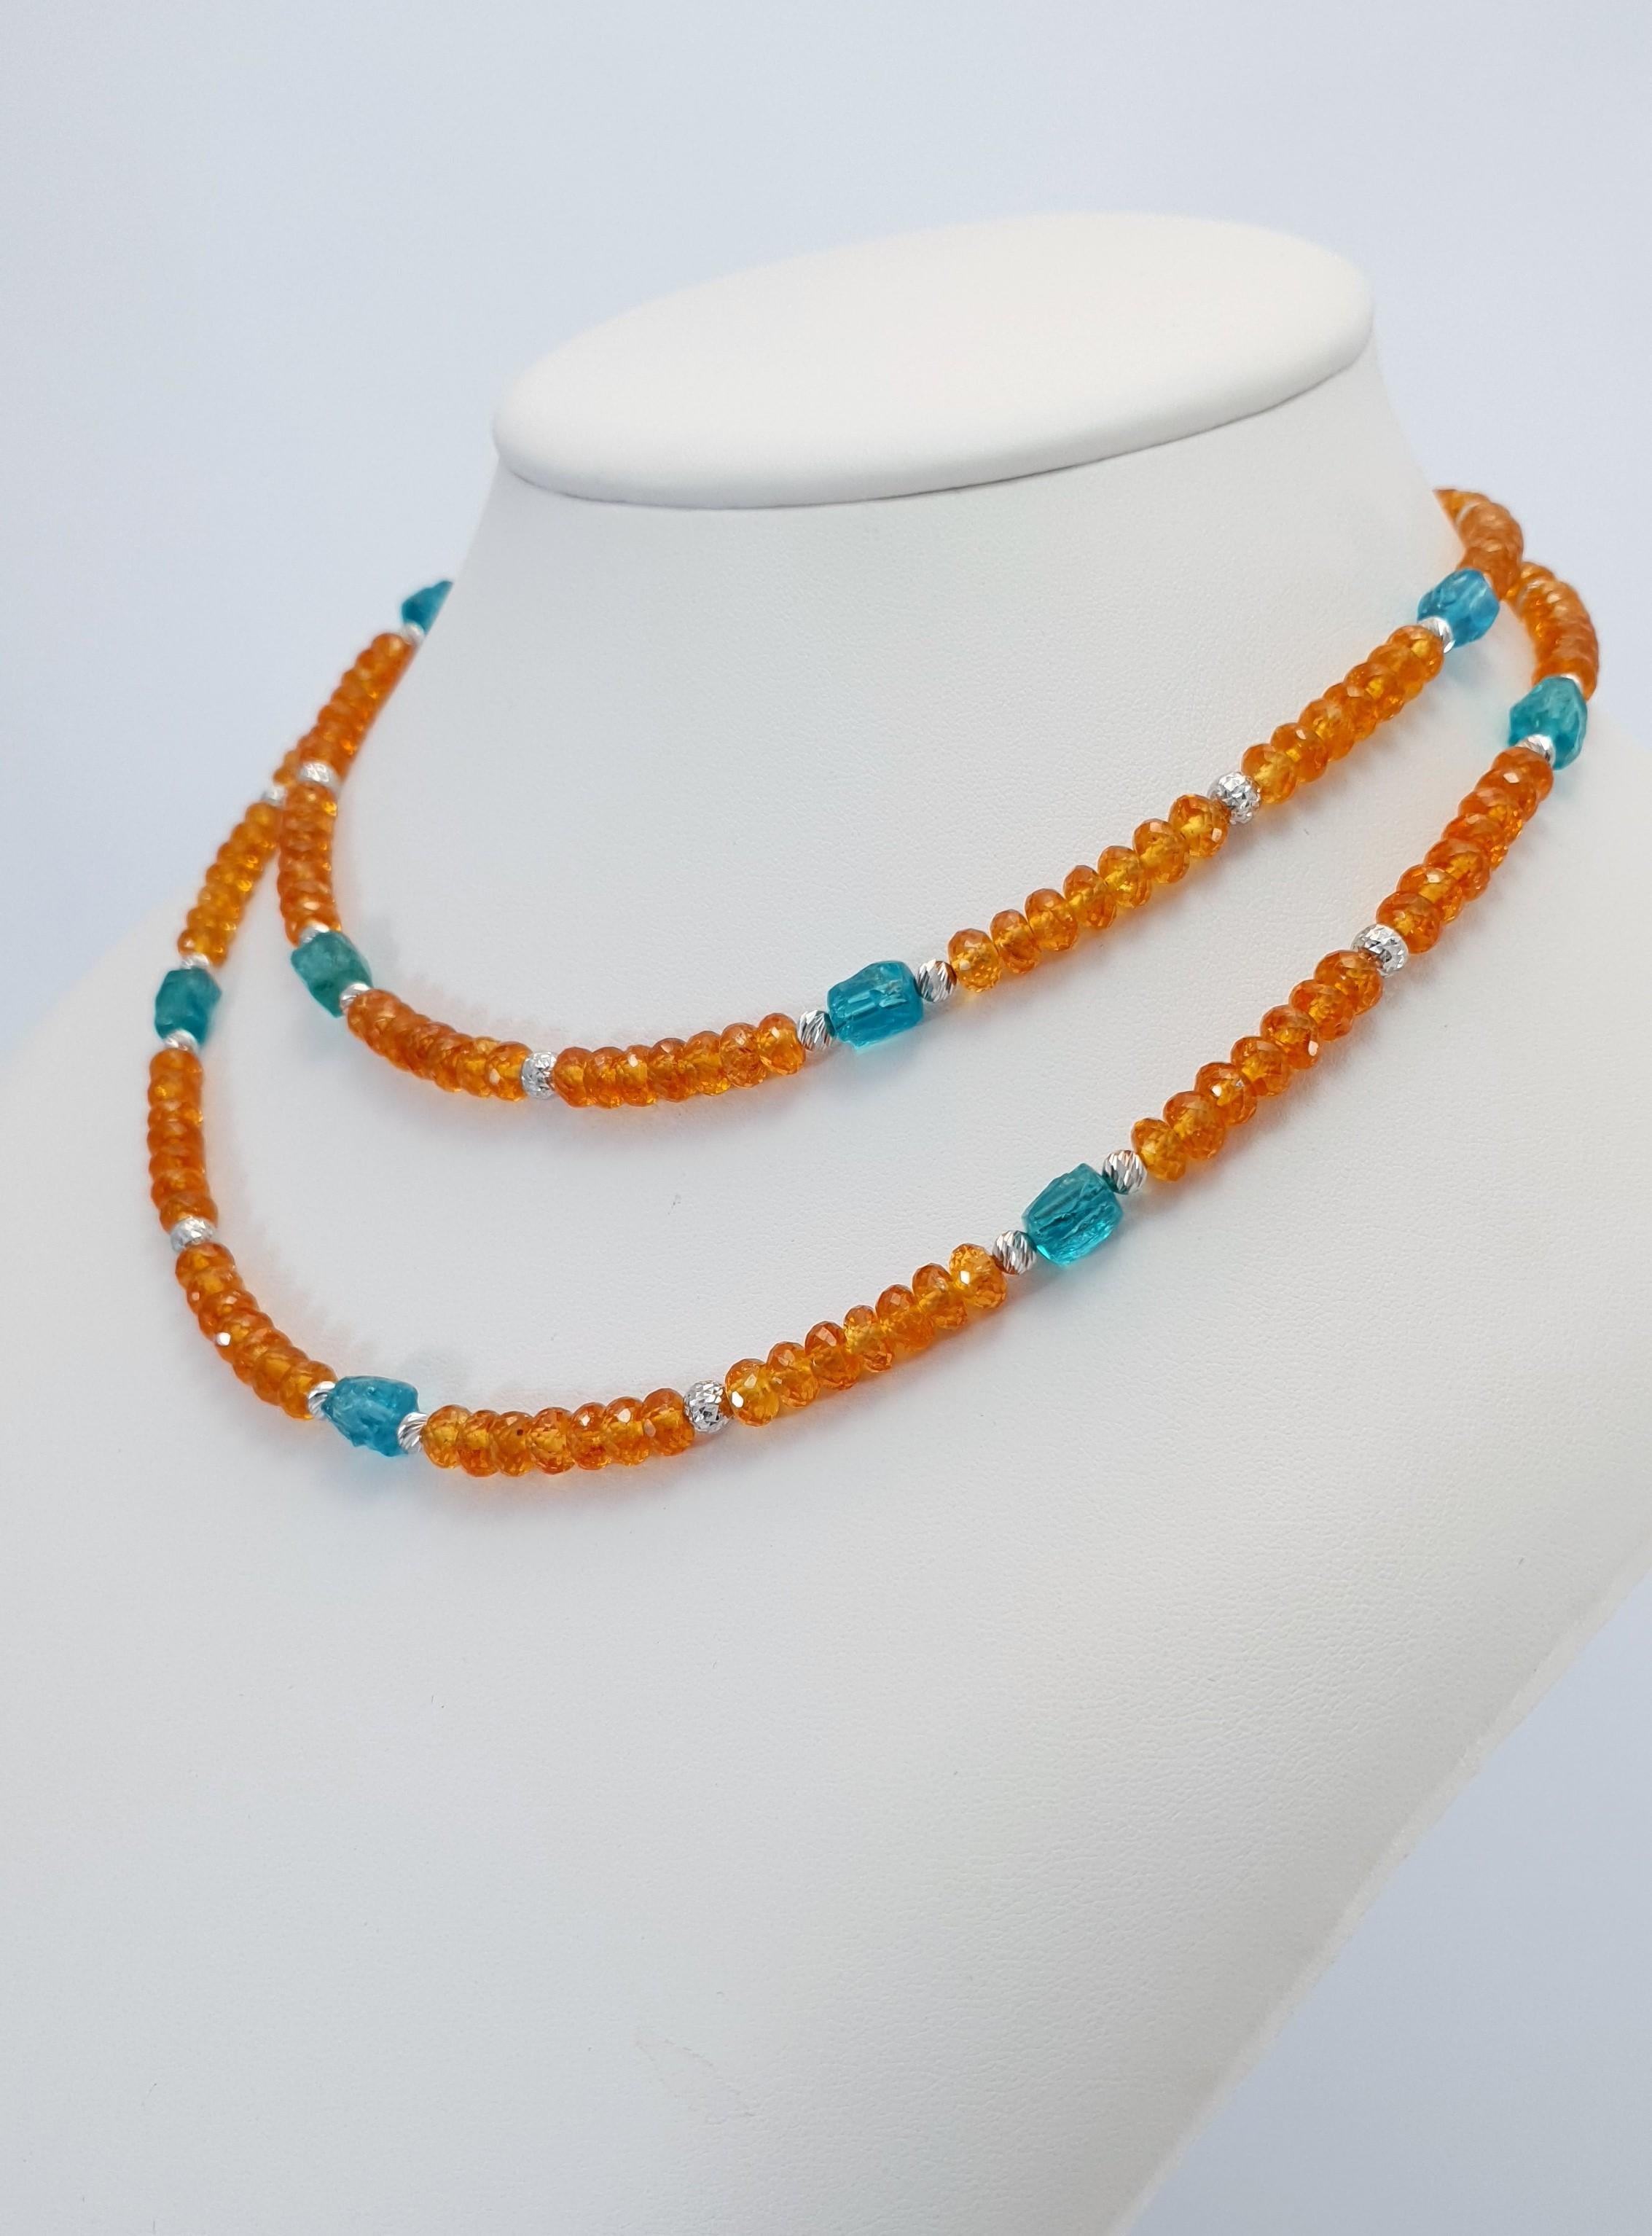 Arts and Crafts Orange Garnets and Paraiba Color Apatite Beads Necklace with 18 Carat White Gold